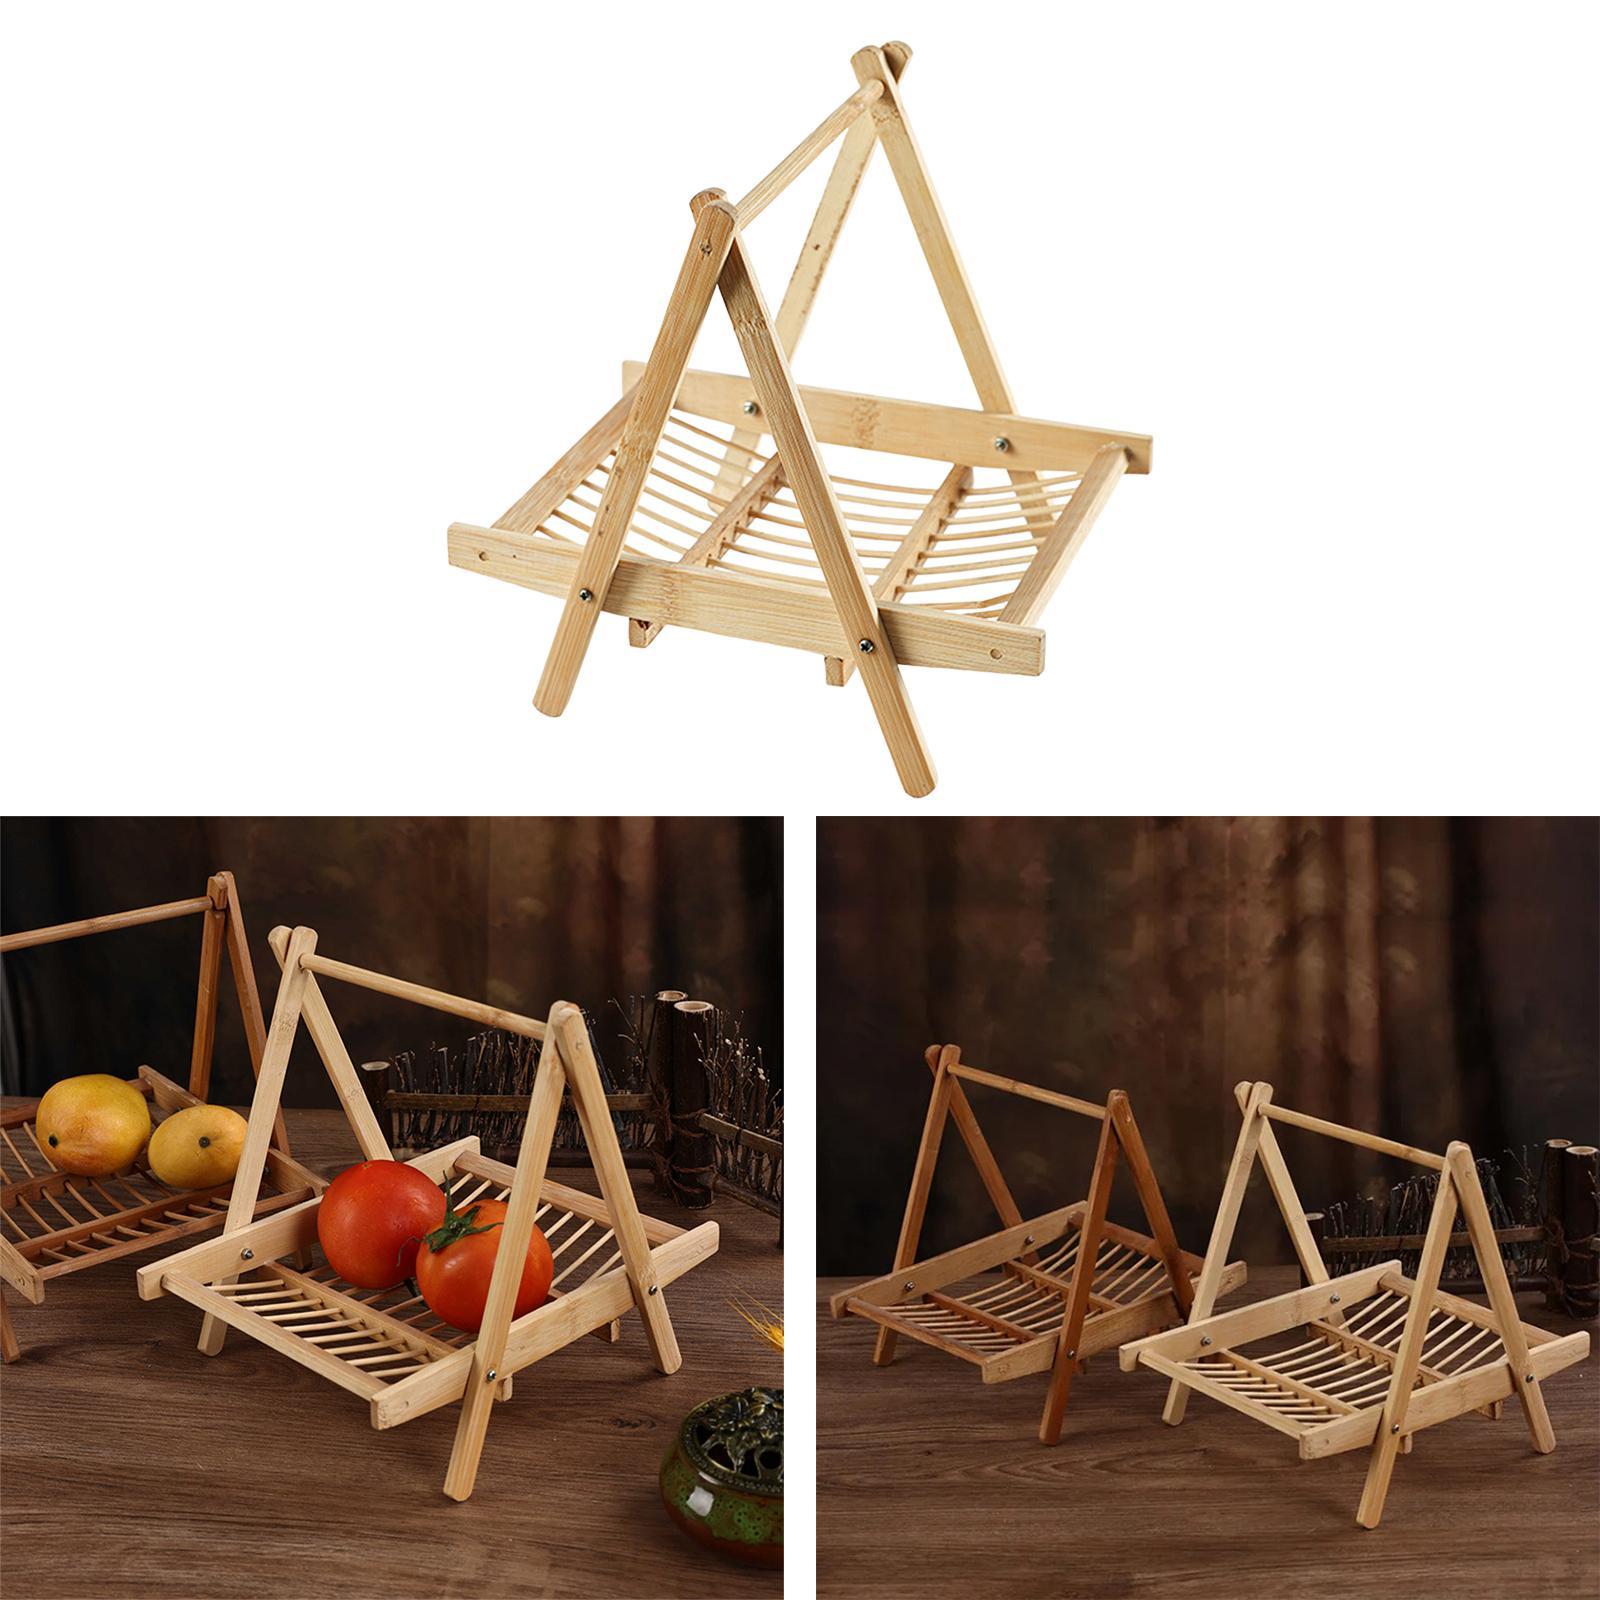 Bamboo Fruit Basket Foldable Rack Multifunctional Bread Fruit Storage Organizer Vegetable Rack for Guest Room Countertop Office Sushi Mutton